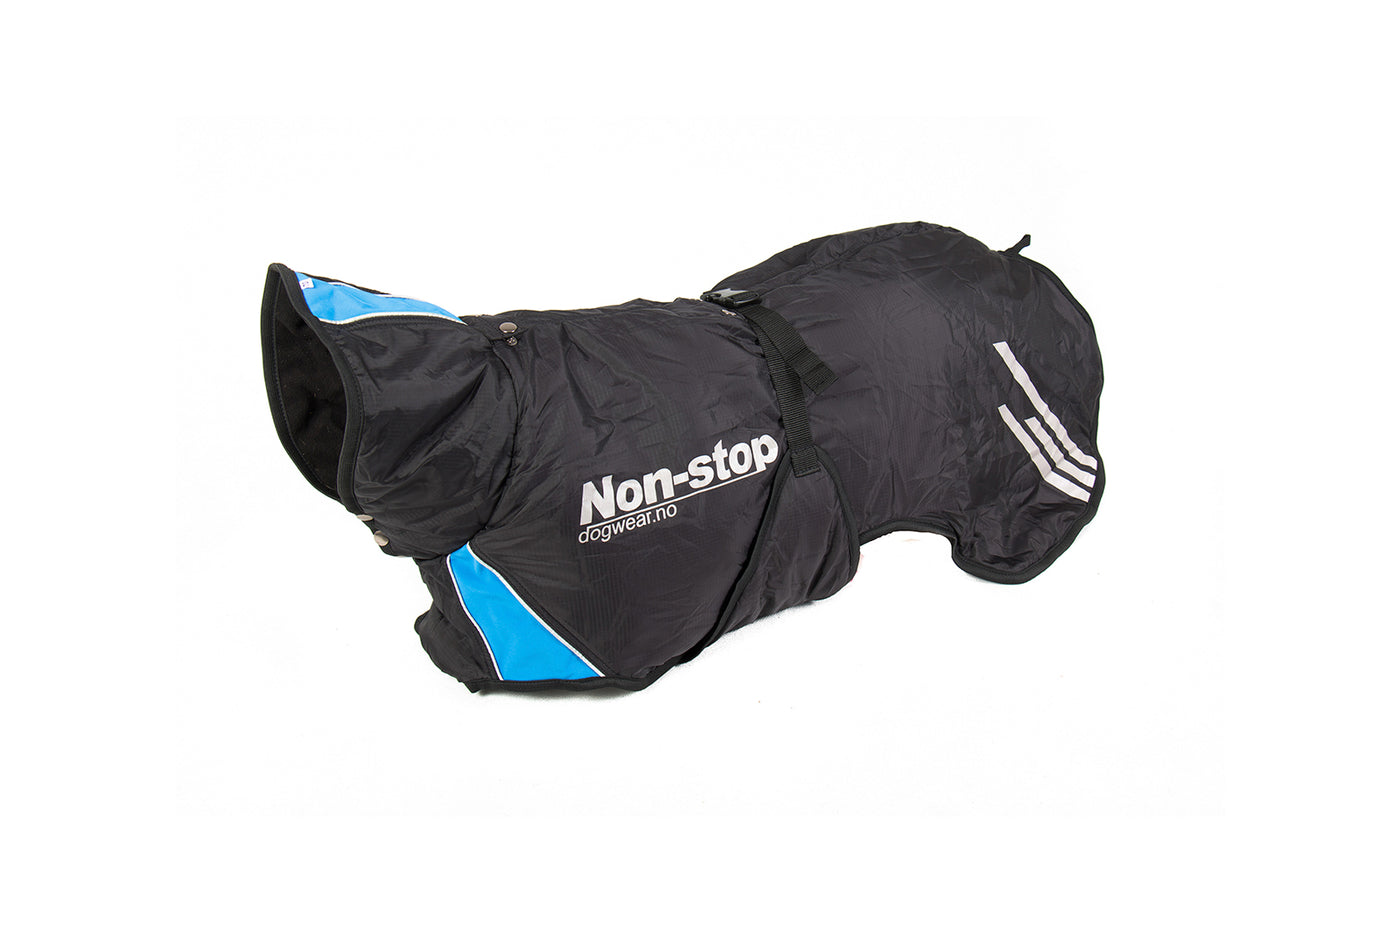 Pro warm jacket Non-stop dogwear lateral